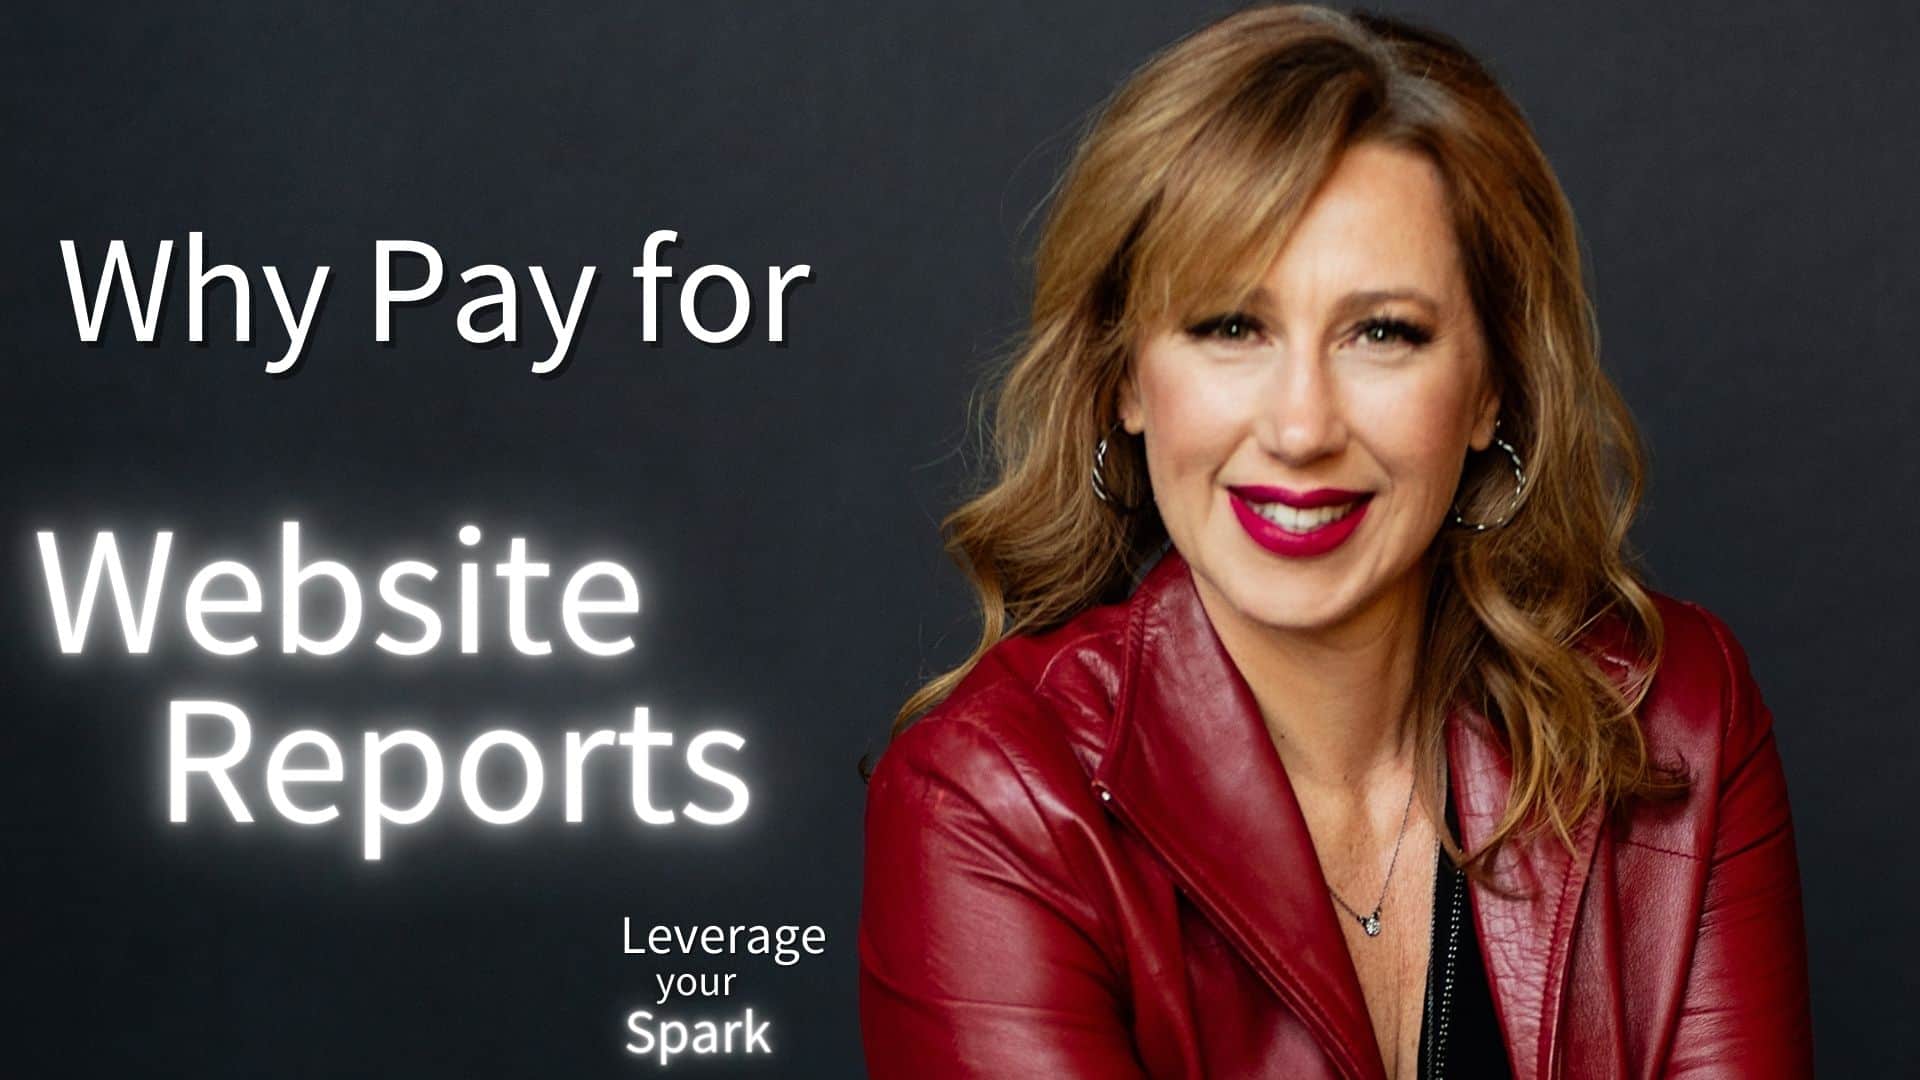 Why Would You Pay for Website Reports?